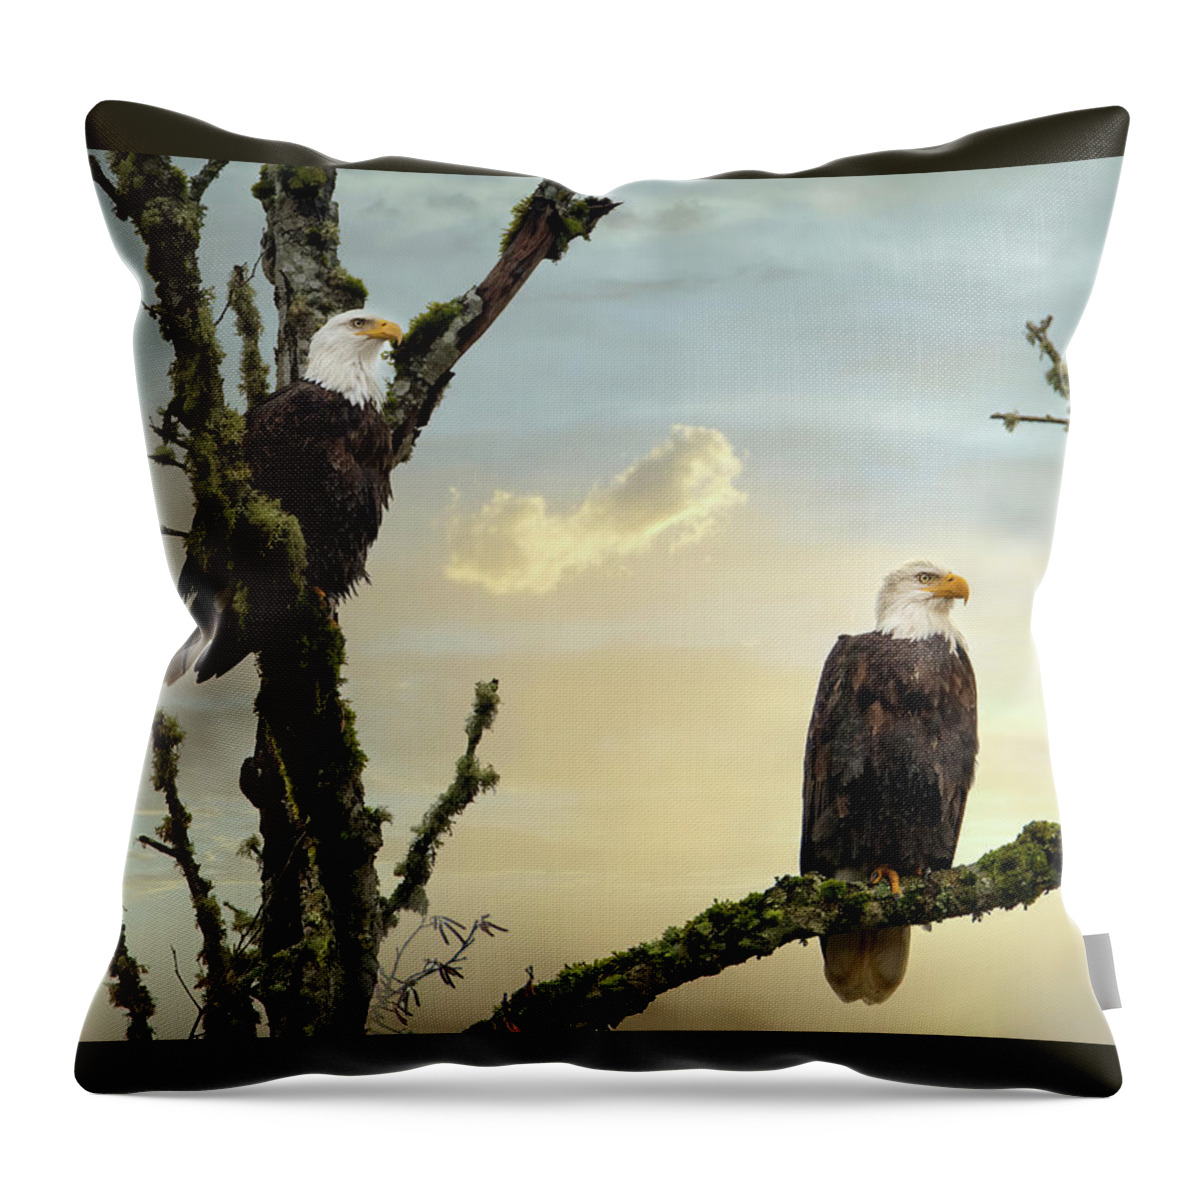 Eagle Throw Pillow featuring the photograph The Eagle Pair by Jeanette Mahoney